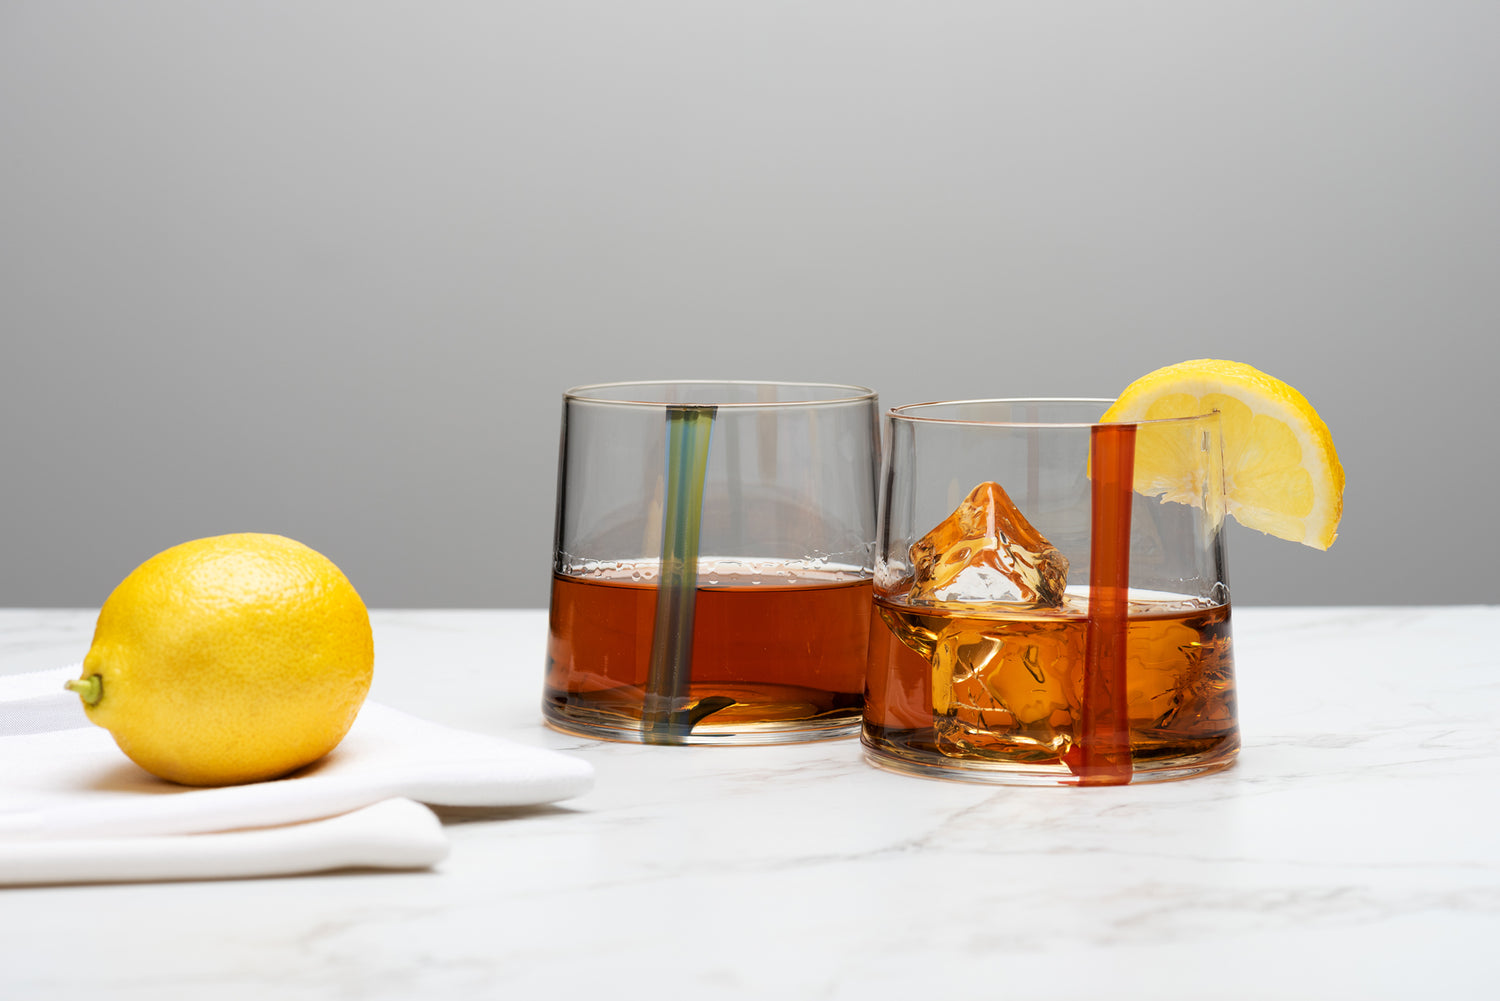 Two Small Batch Glass rocks glasses sit on a marble table with ice and whiskey and a lemon. Image by Loam